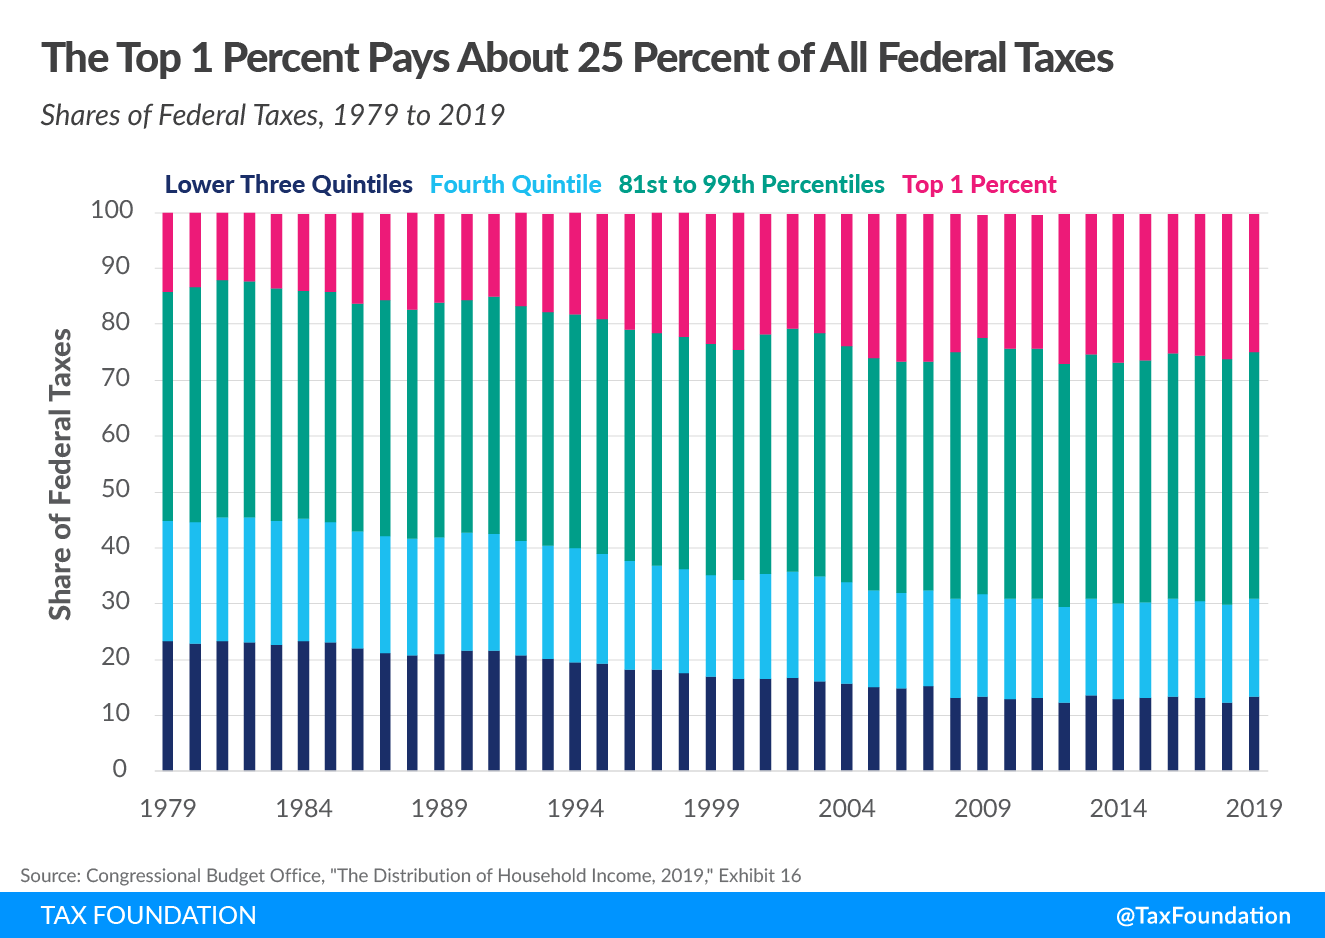 share of federal tax burden by income group